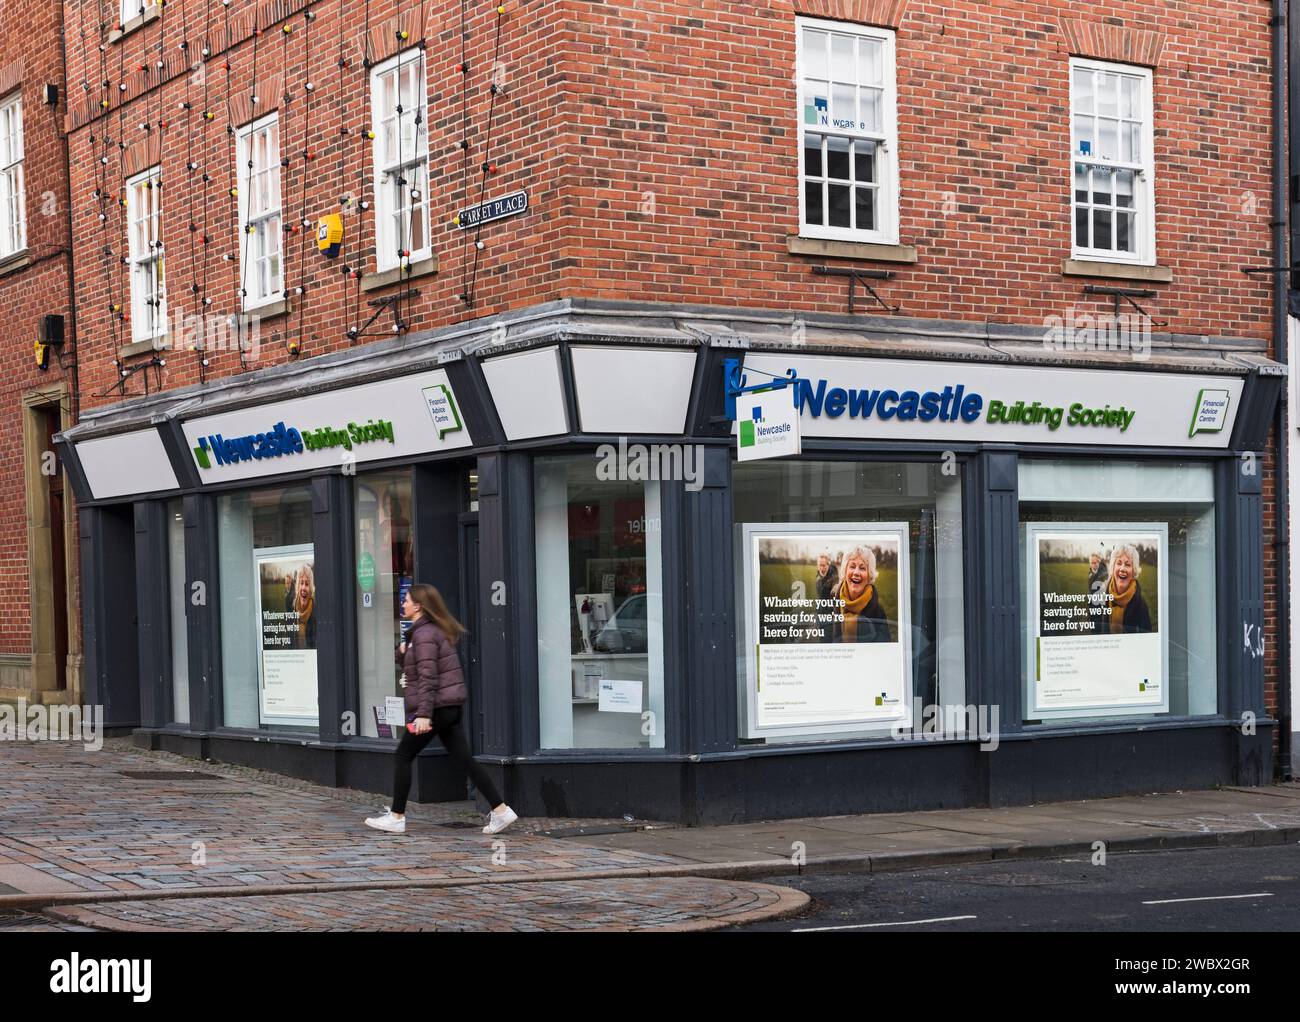 Branch ot the Newcastle Building Society in the market town of Morpeth, Northumberland, UK. Stock Photo